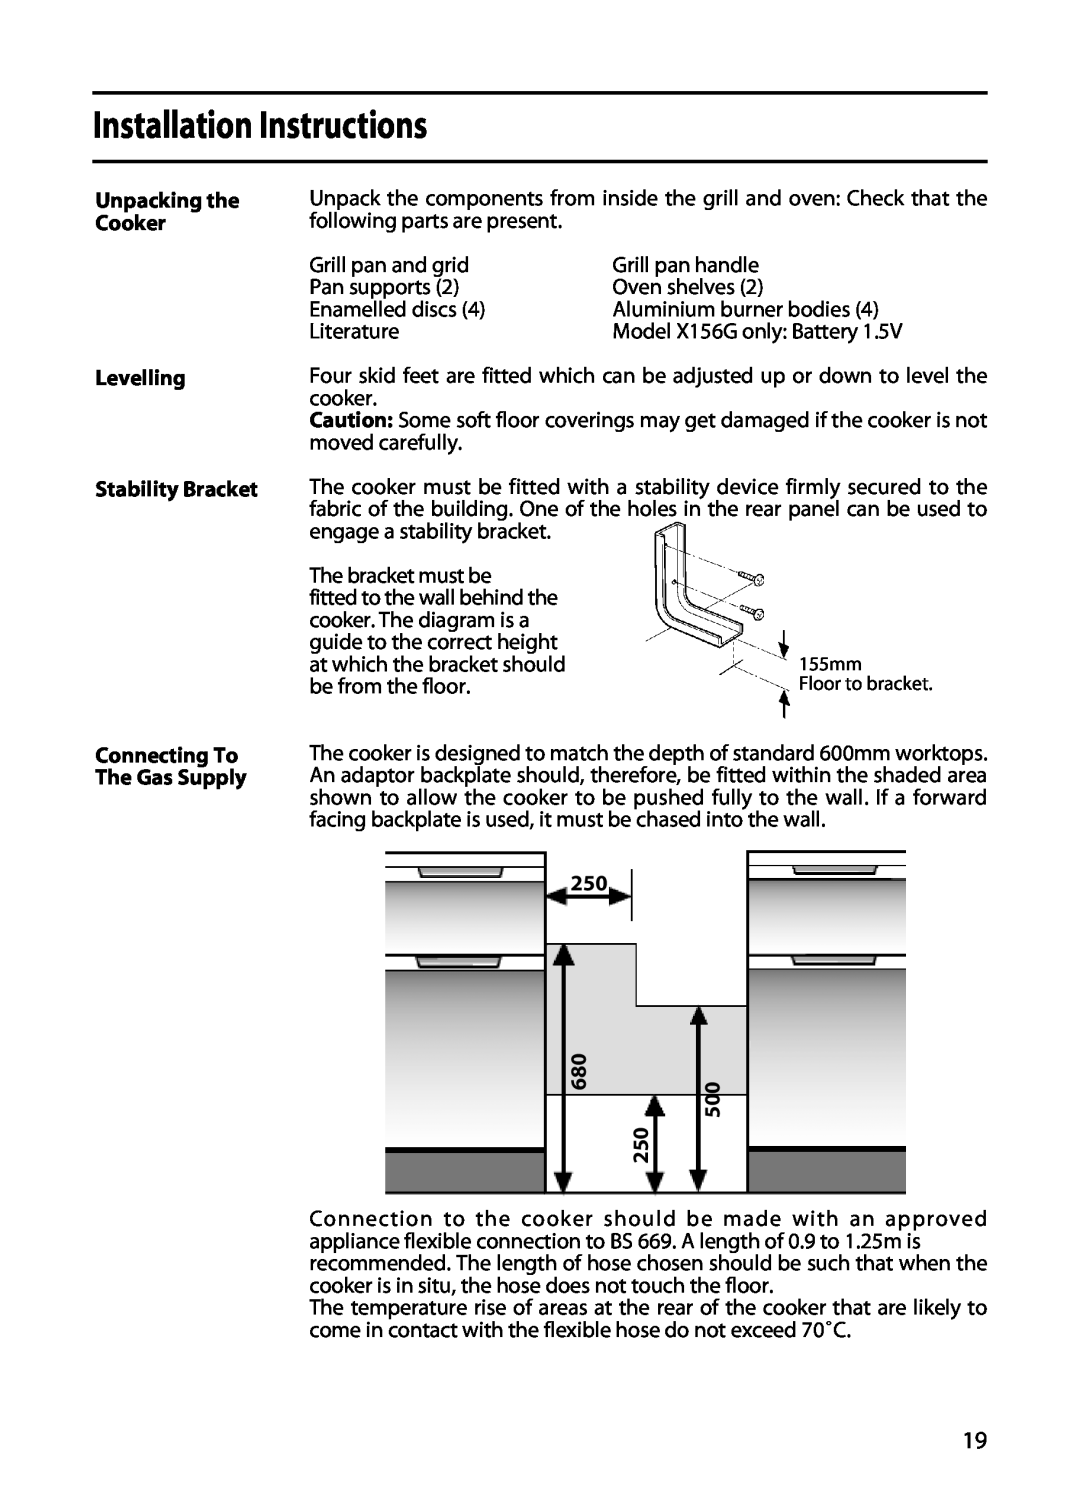 Hotpoint 5TCG manual Installation Instructions, Unpacking the Cooker Levelling Stability Bracket, 680680 